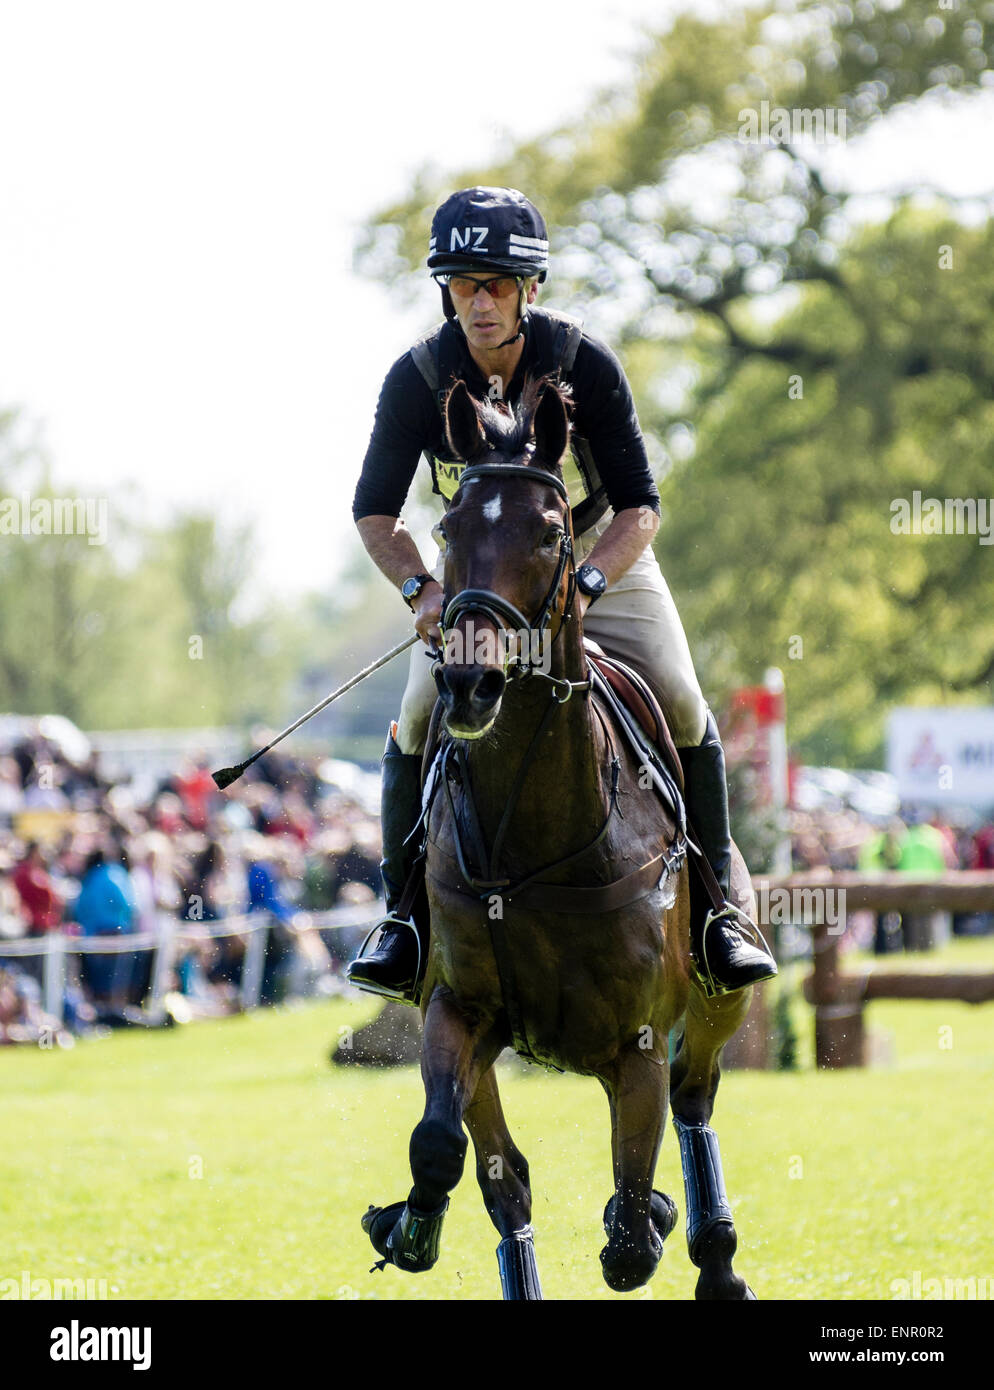 Badminton, UK.  9th May 2015.  New Zealand rider Andrew Nicholson on Calico Joe competing in the Cross-country stage of the Badminton Horse Trials 2015.  Nicholson leads after the second stage of the competition. Credit:  Steven H Jones/Alamy Live News Stock Photo